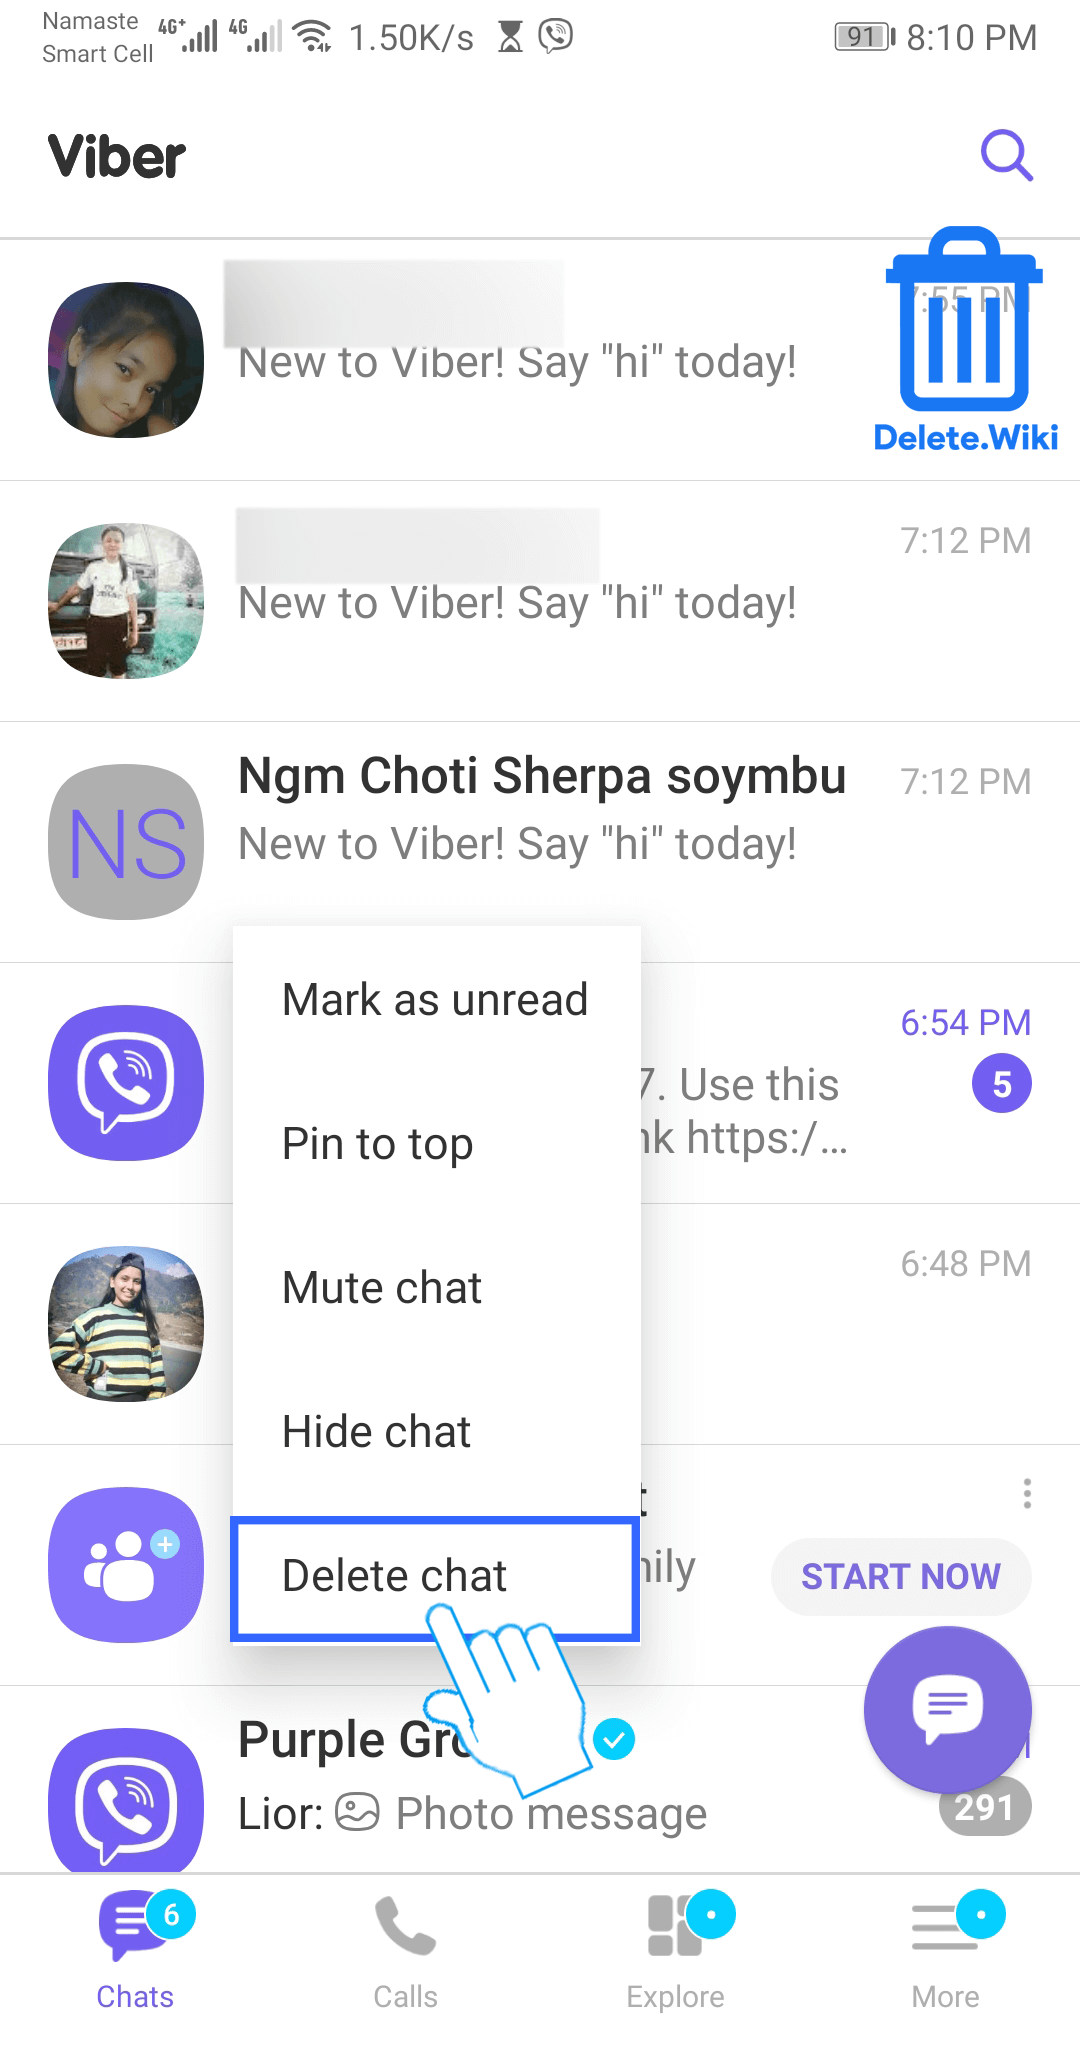 how to search in viber chat